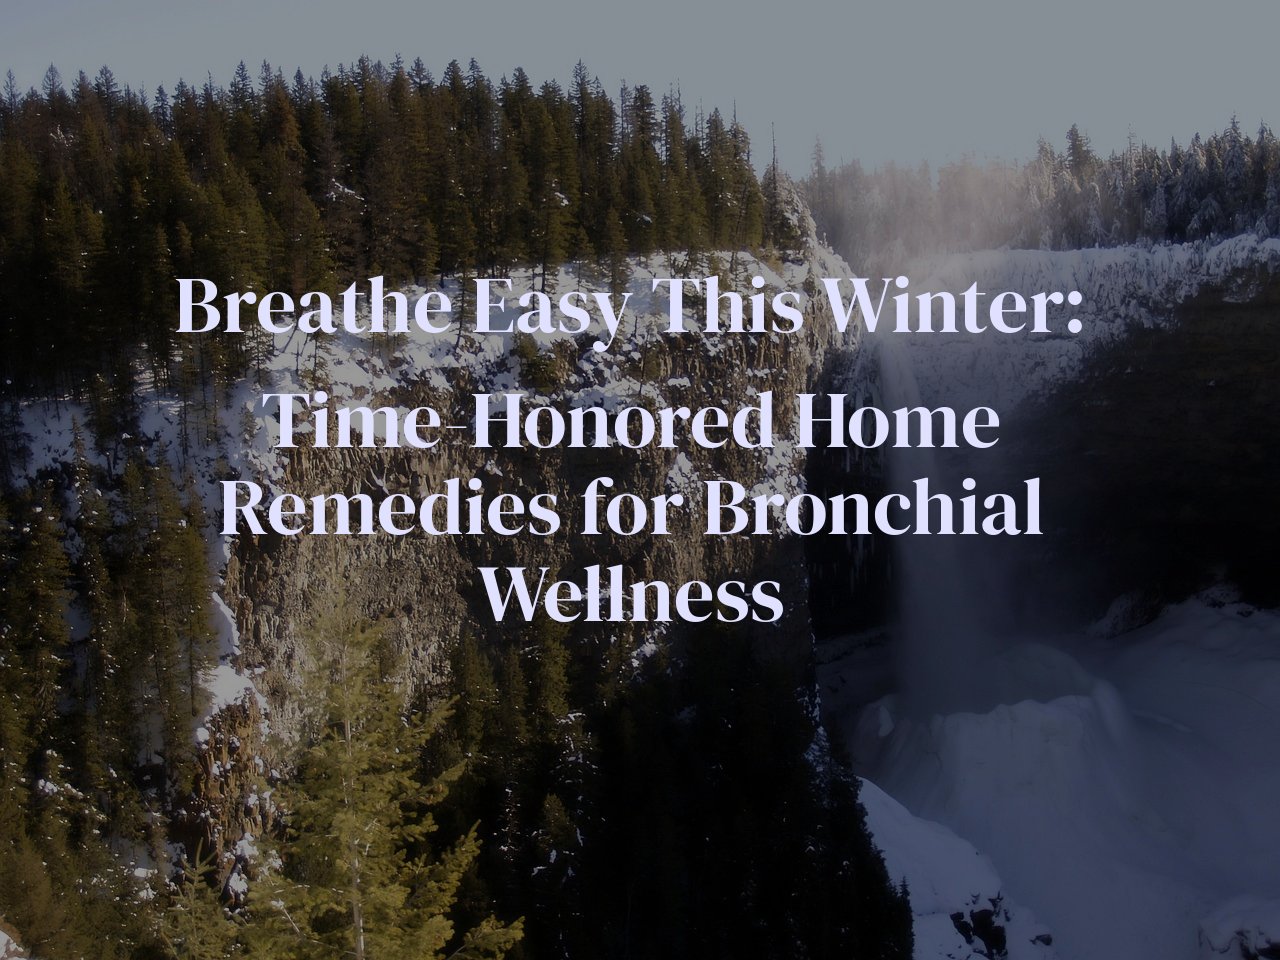 Breathe Easy This Winter: Time-Honored Home Remedies for Bronchial Wellness